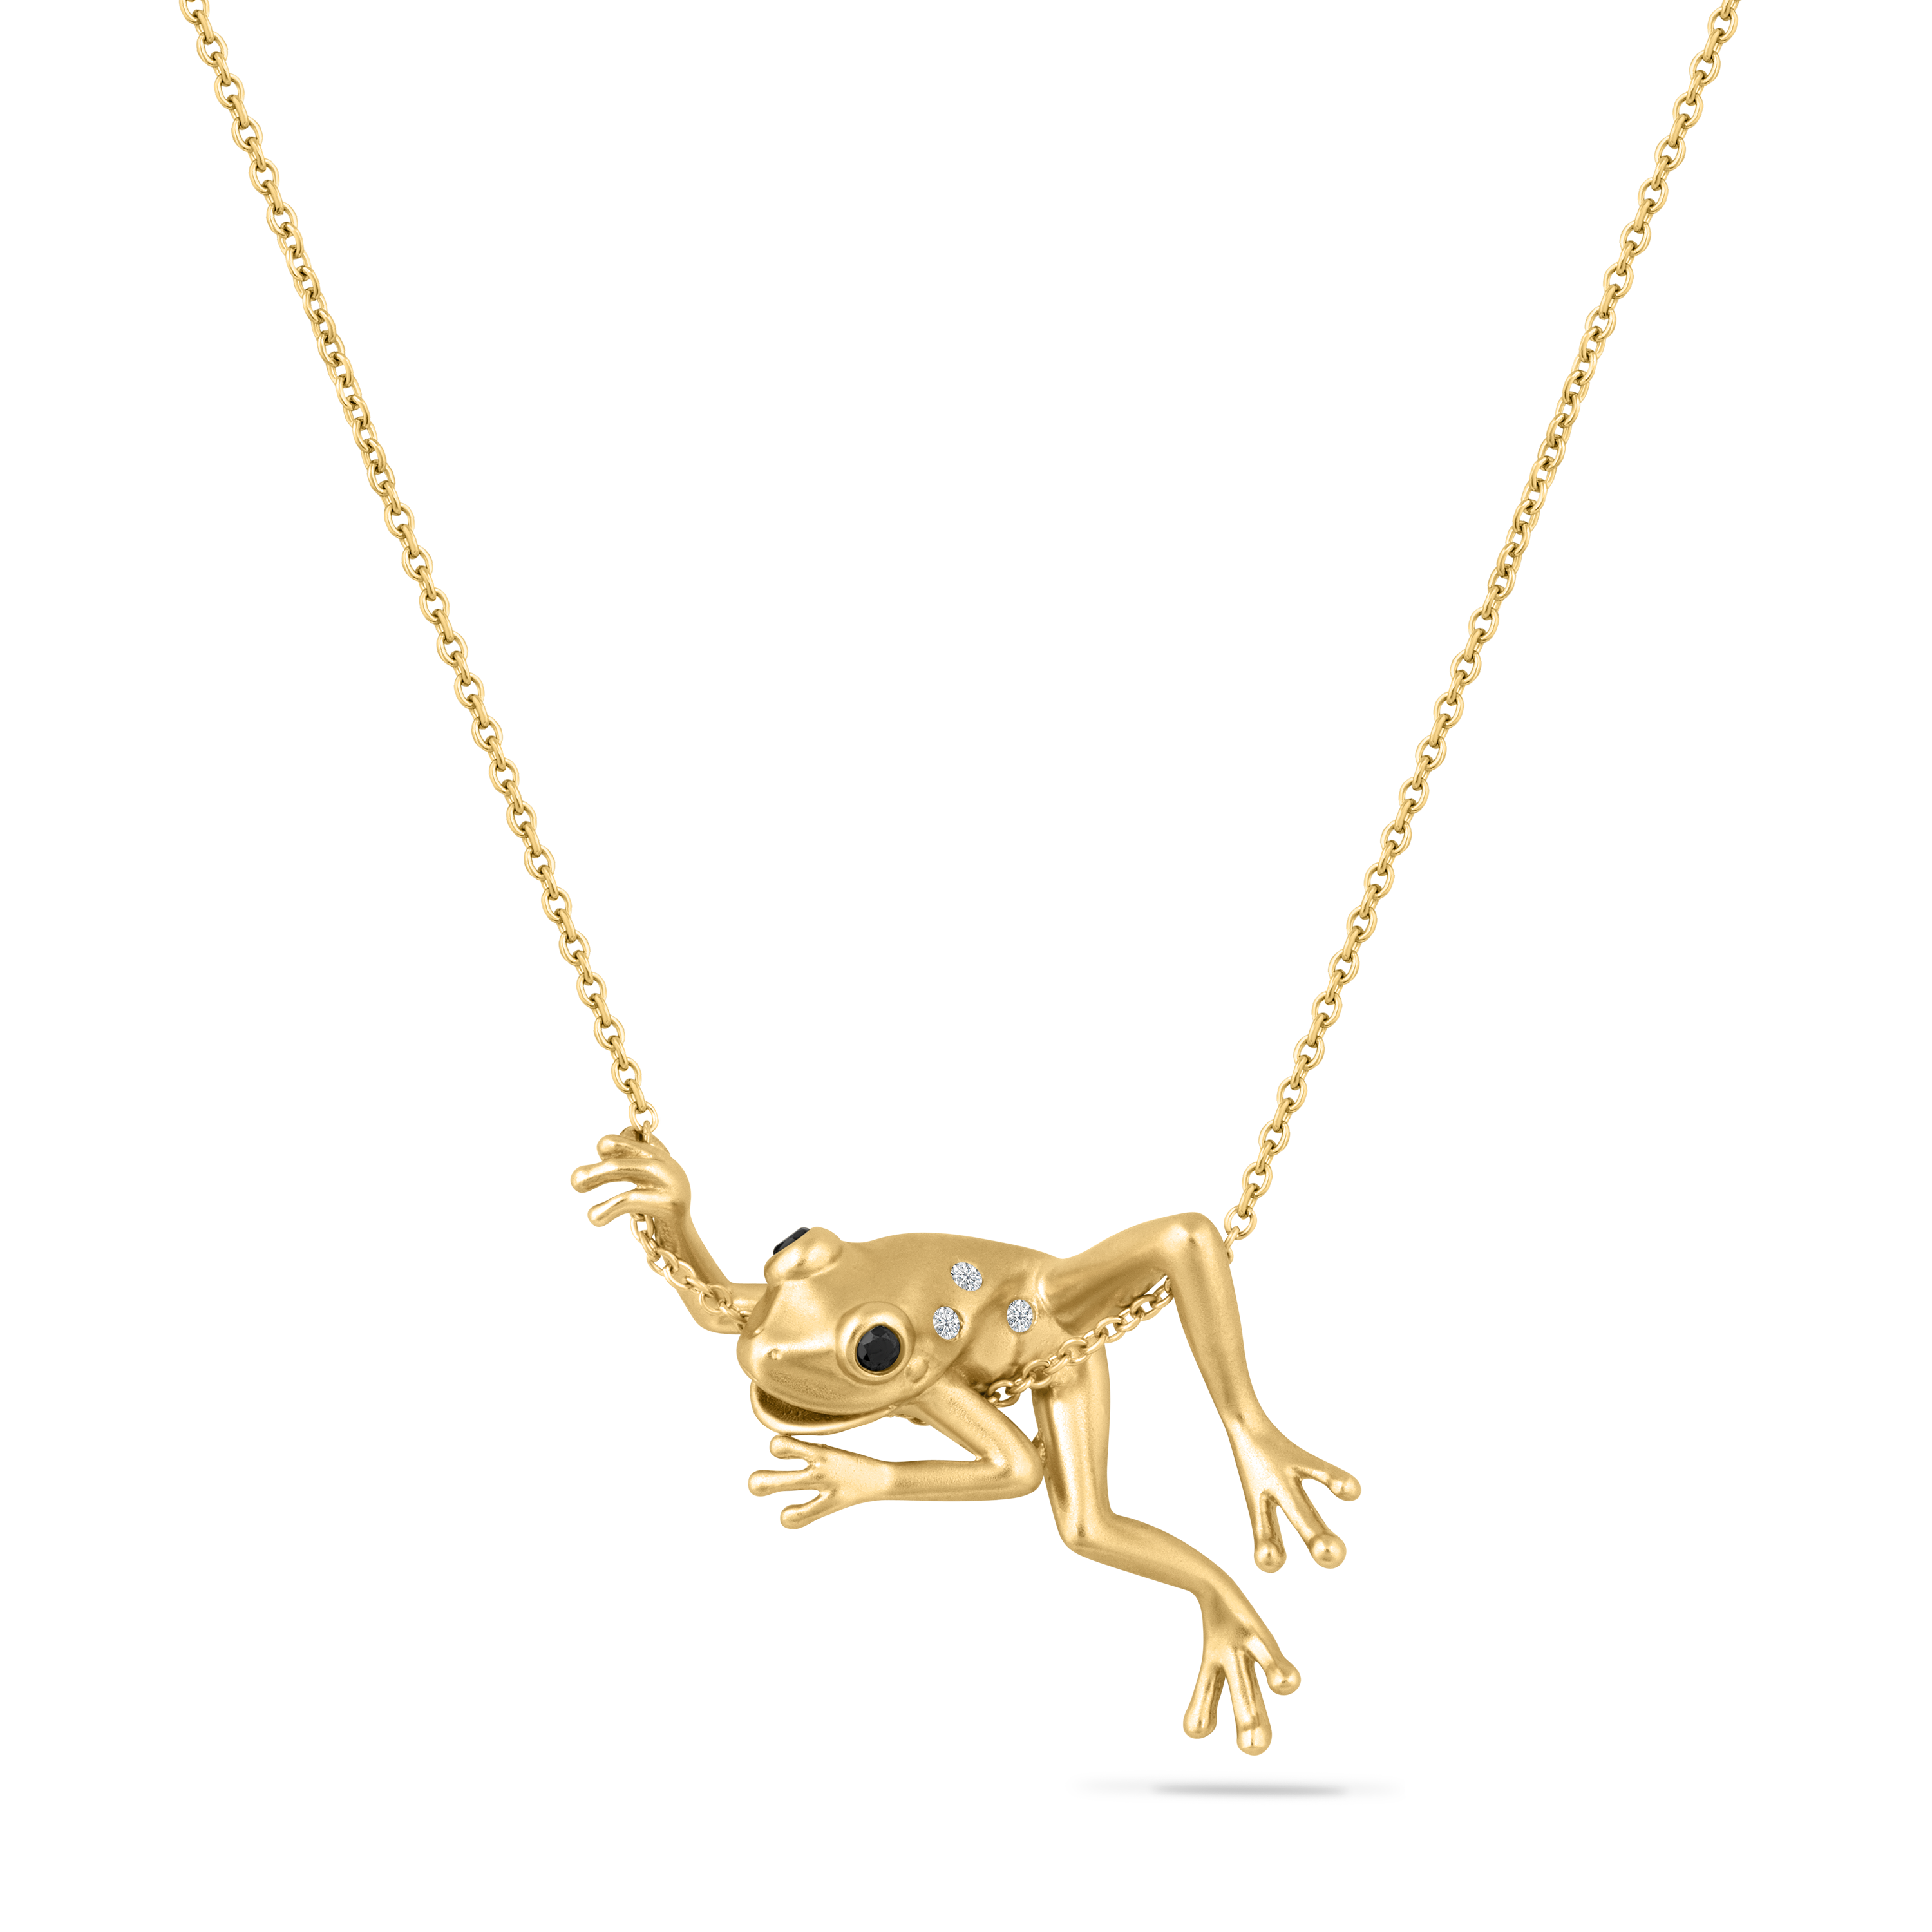 14K FROG PENDANT WITH 3 DIAMONDS 0.016CT AND 2 BLACK DIAMONDS 0.038CT ON 18 INCHES CABLE CHAIN